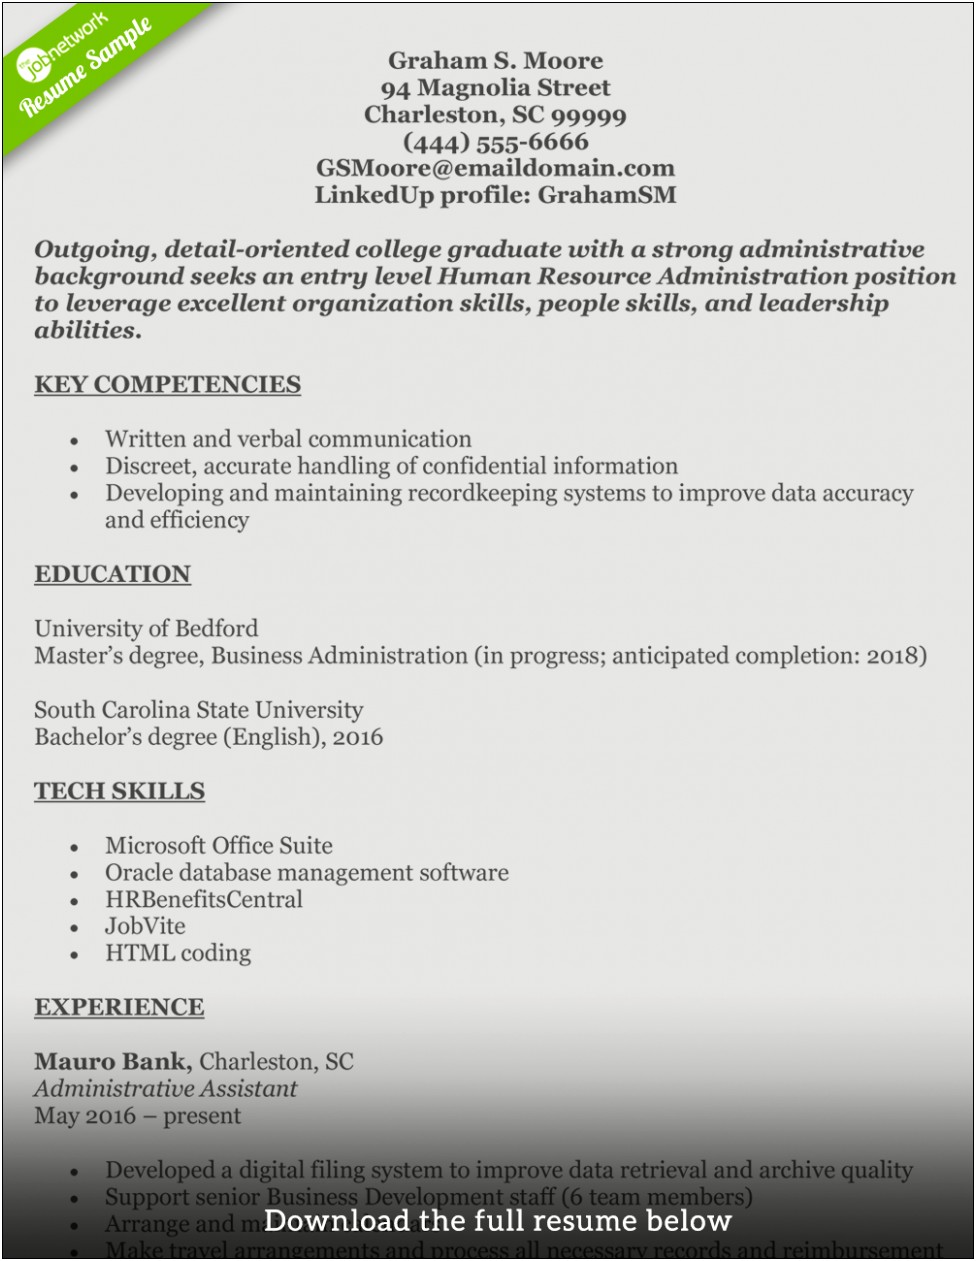 People Skills For A Resume